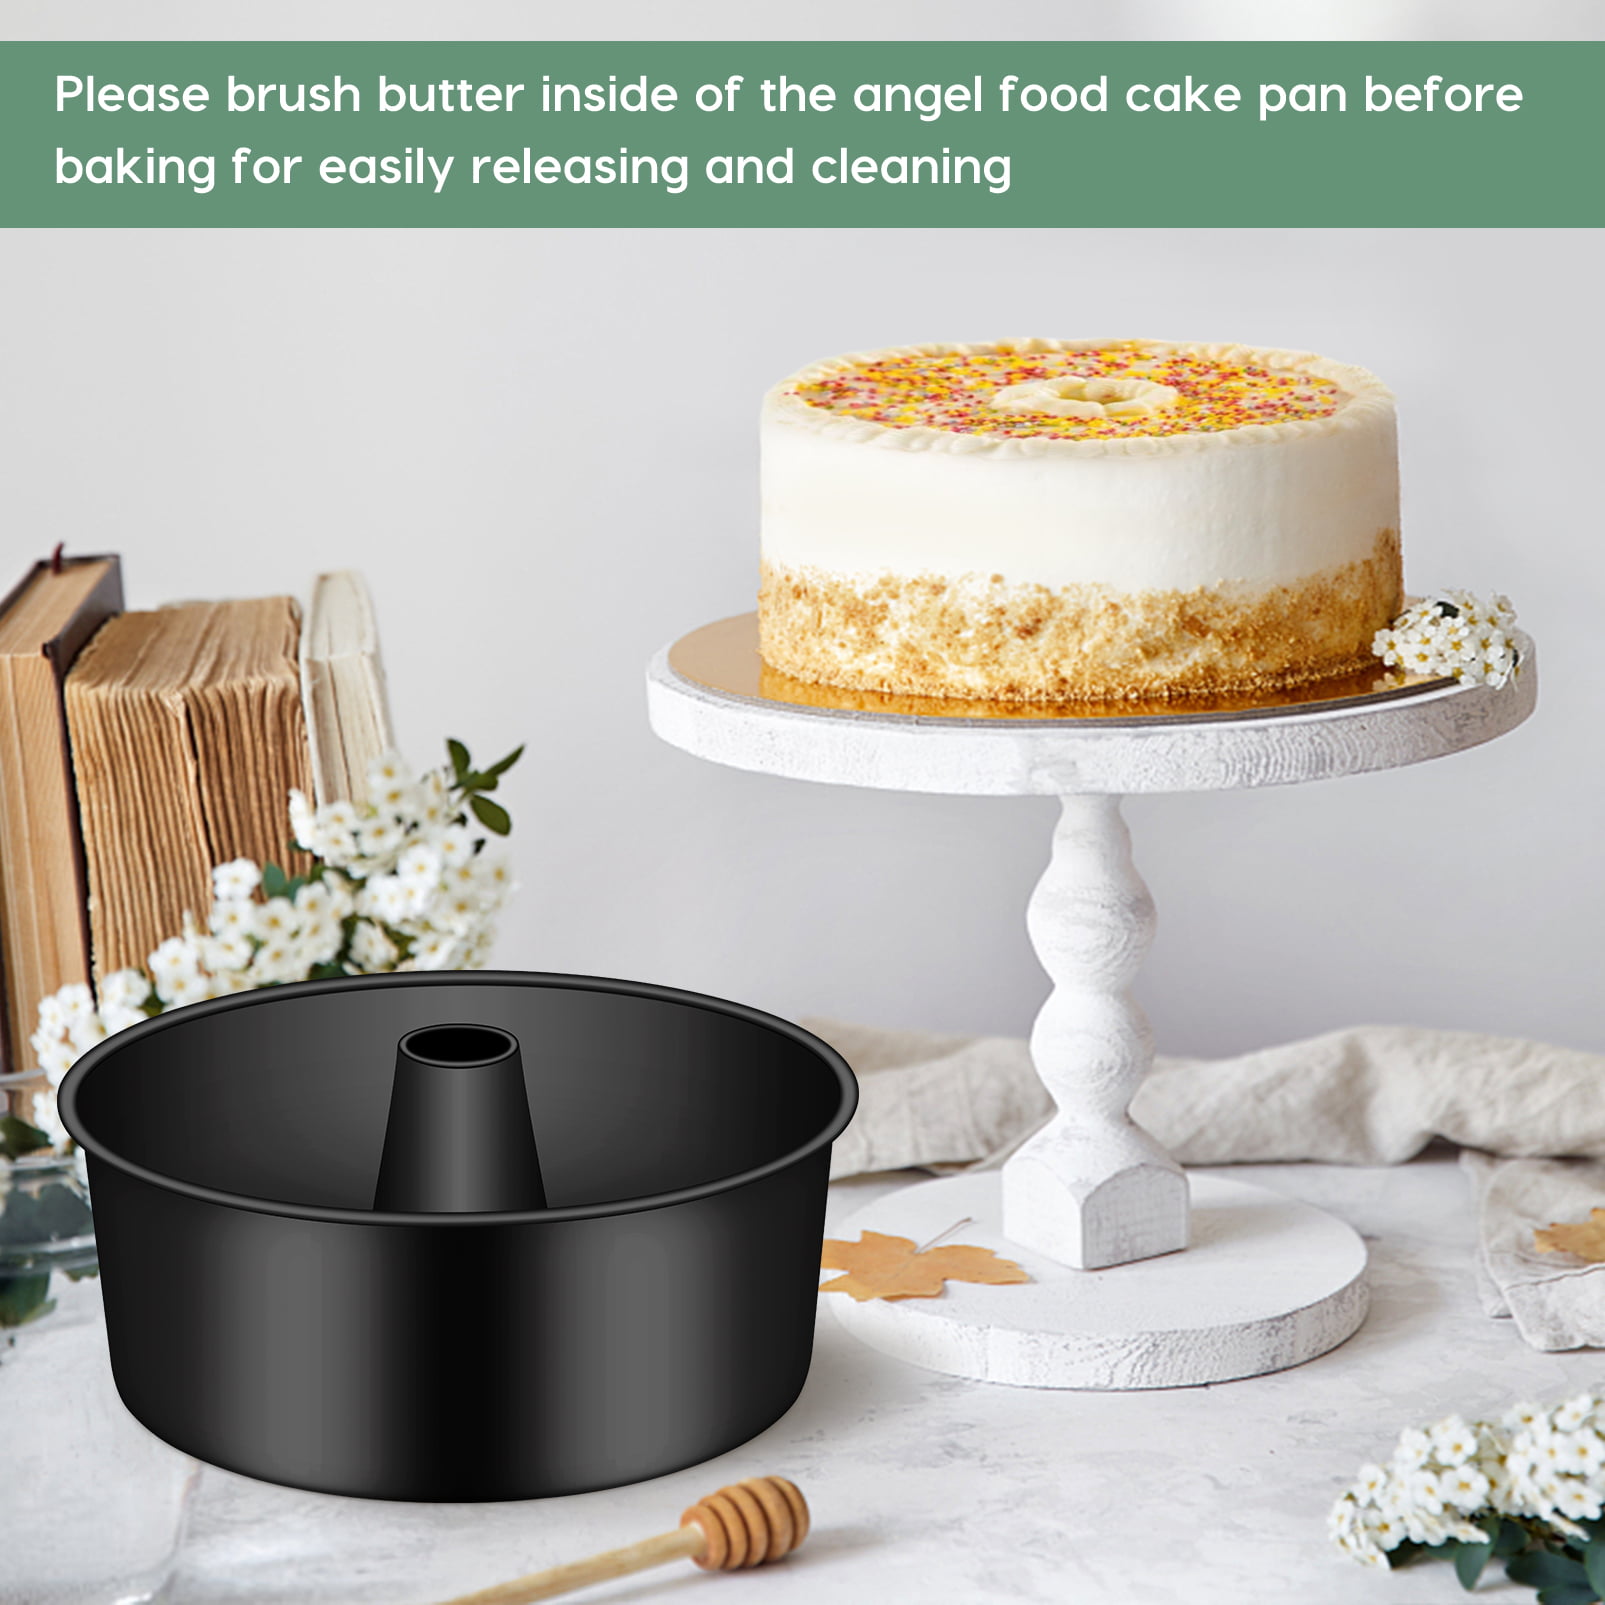 WOVTE Cake Pan 10 inch Round 3 Inch Deep Easy Release Non Stick Food Grade  Silicone Angel Food Cake Pan Removable Bottom One Piece Tube Pans for Baking  Pound Cake Green 